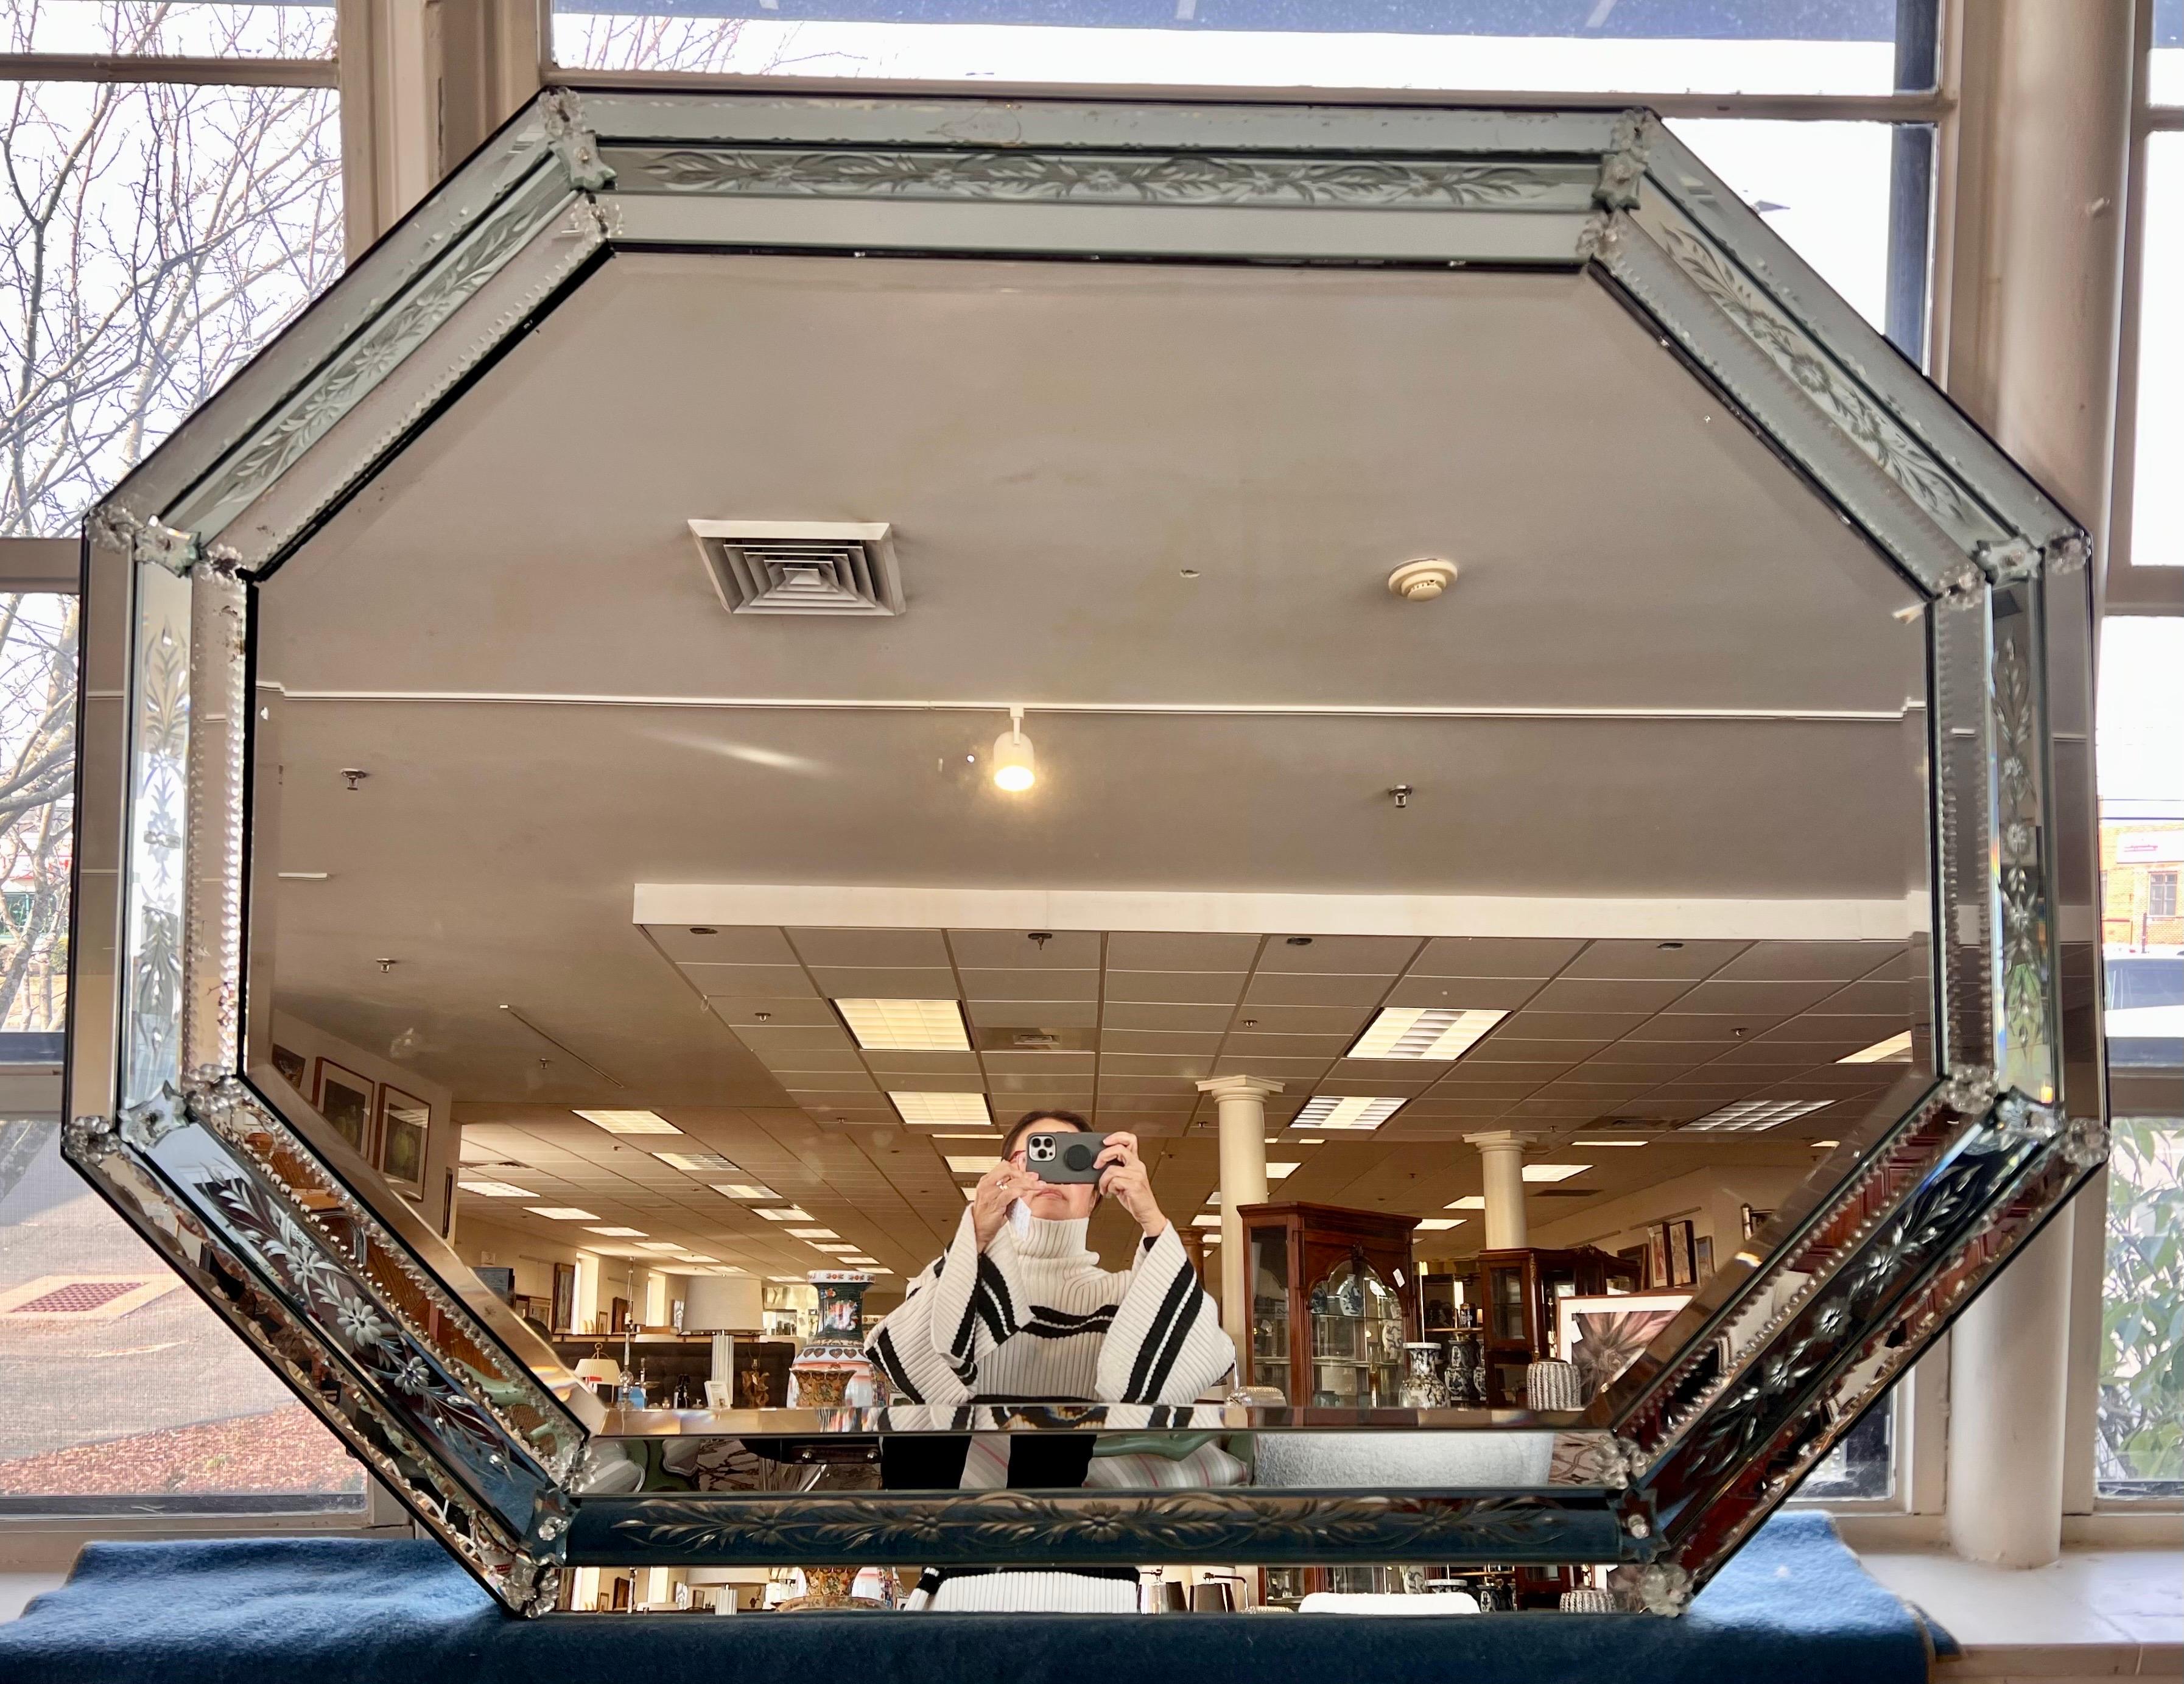 Spectacular midcentury oversized Venetian mirror has a delicately paned triple glass frame surrounding a central beveled mirror. Features an engraved floral motif and is trimmed with rosettes. Beautiful detail all around.